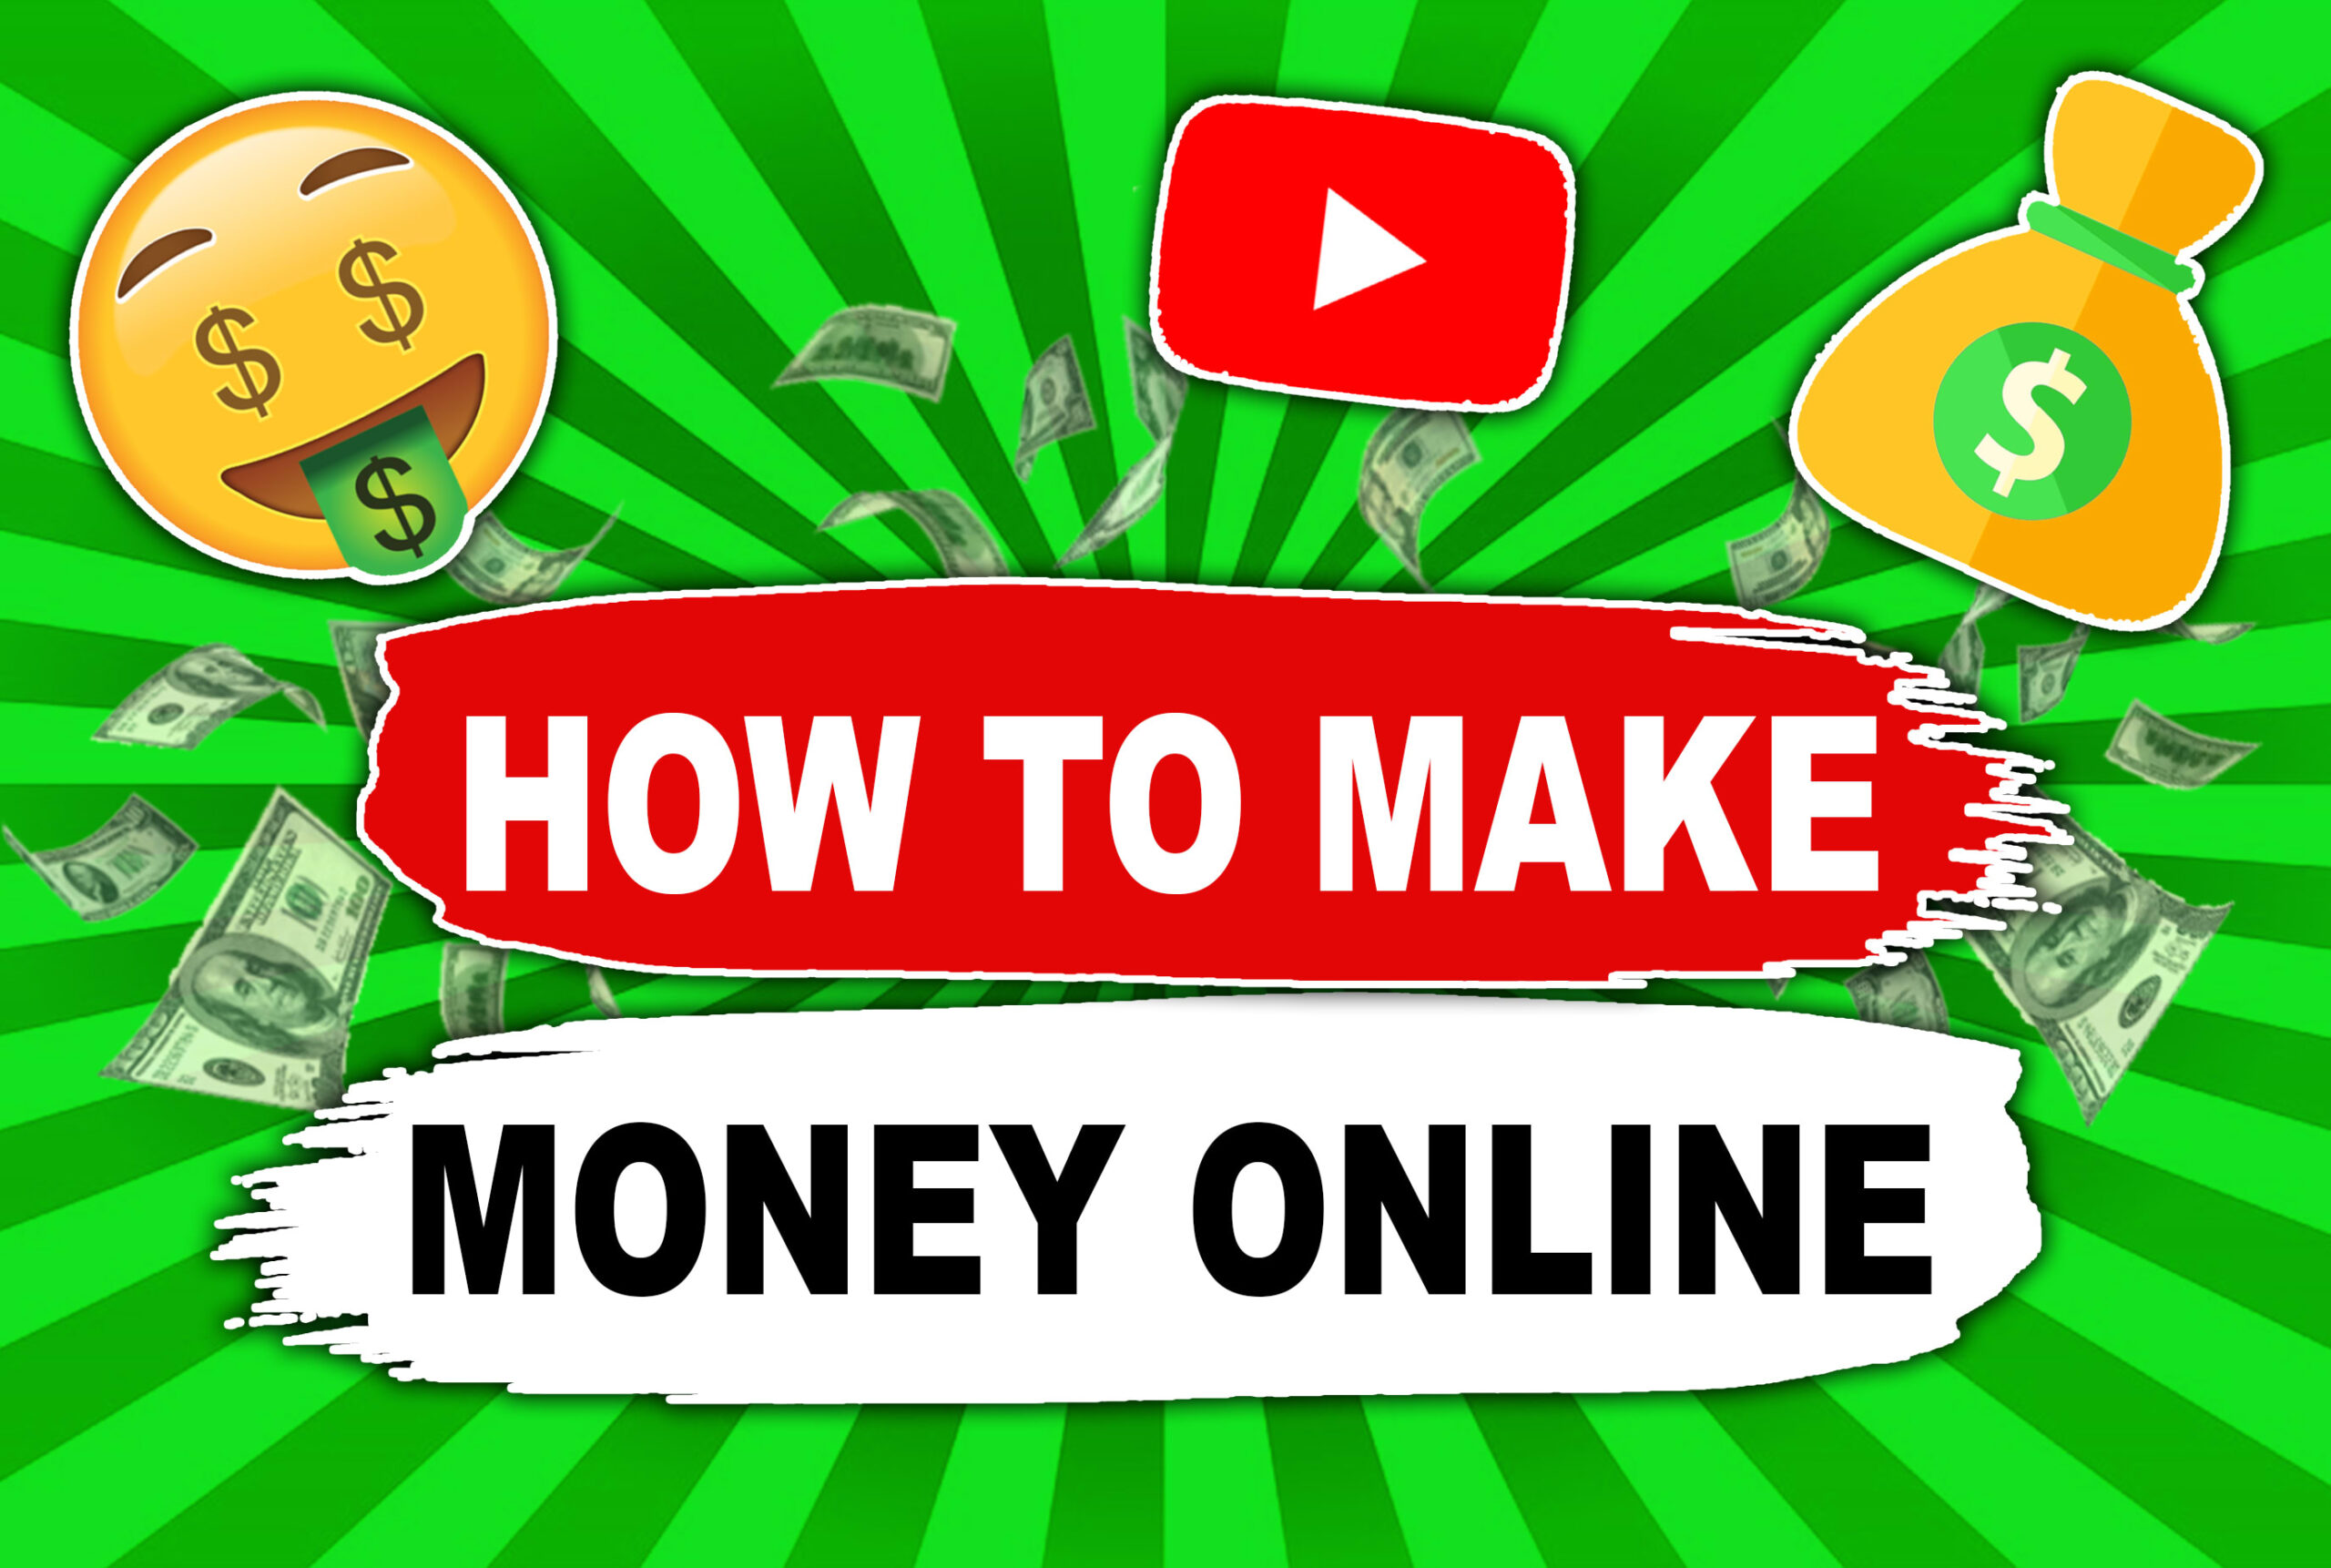 how to make money from youtube channel